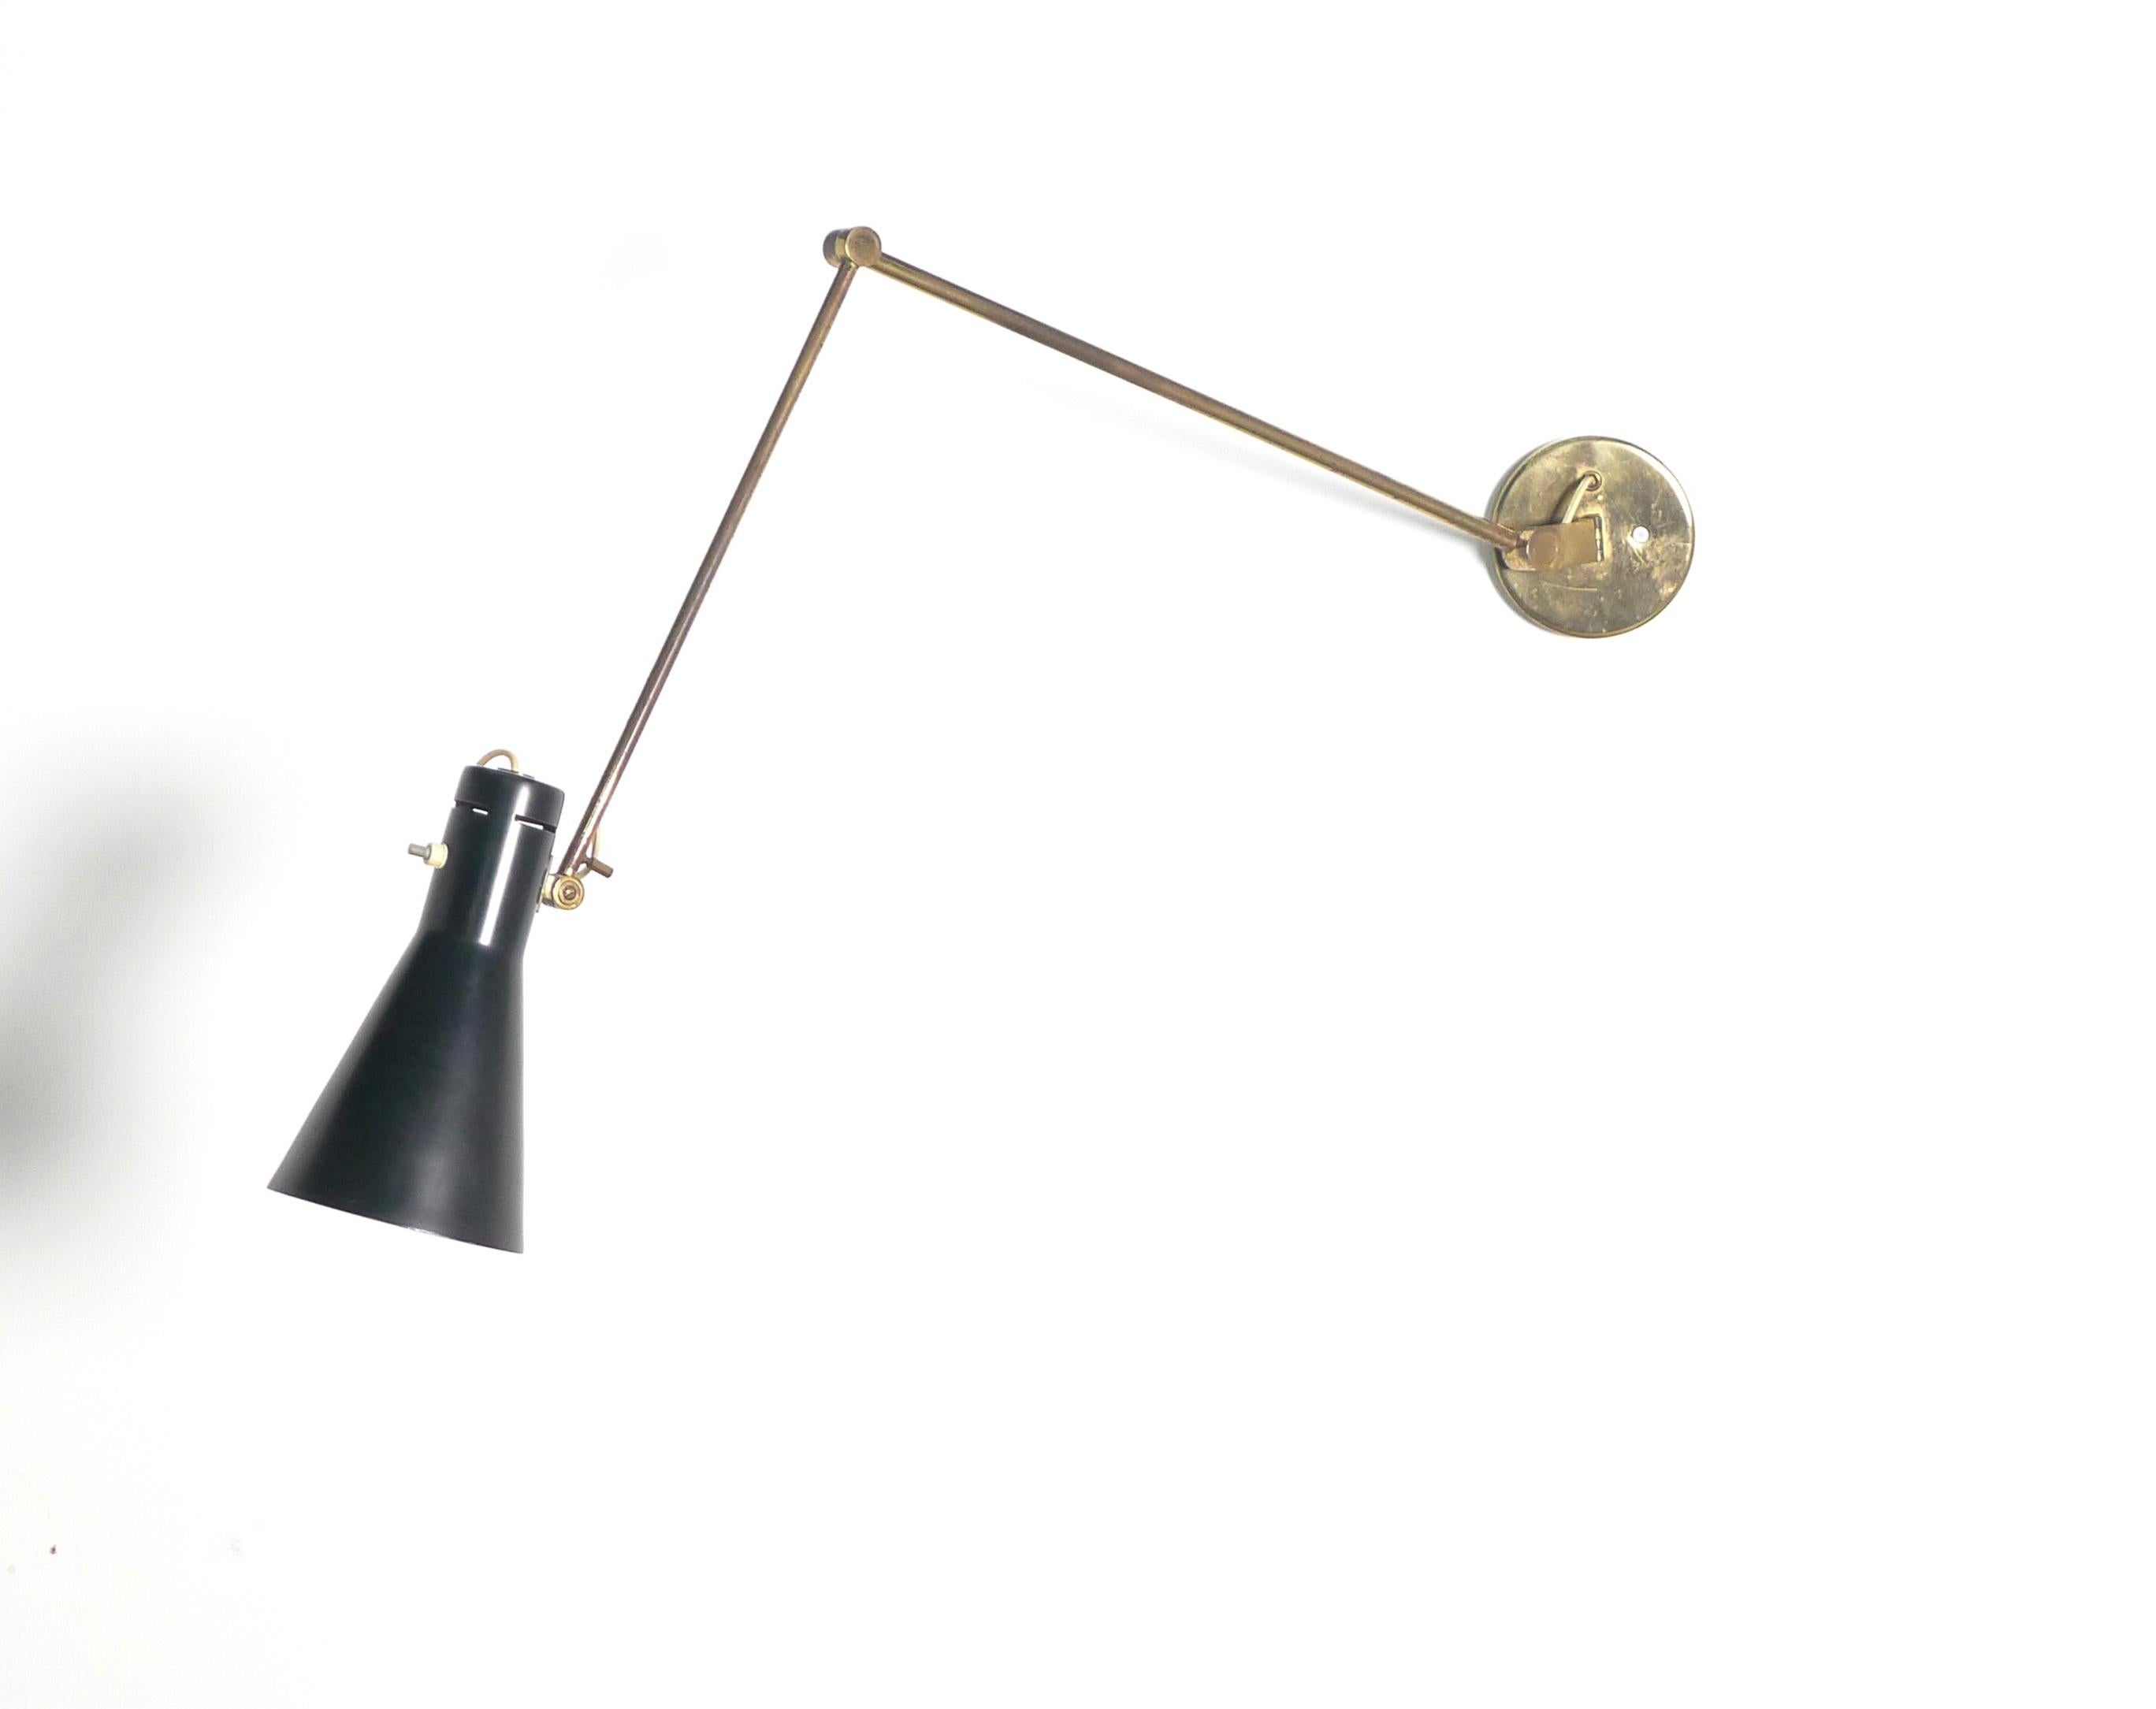 This is a rare design, featuring Vigano's distinctive conical shade mounted on an articulated brass arm with circular wall mount. The hinged arm allows the shade to be moved in multiple directions, rotating and pivoting to point the light where